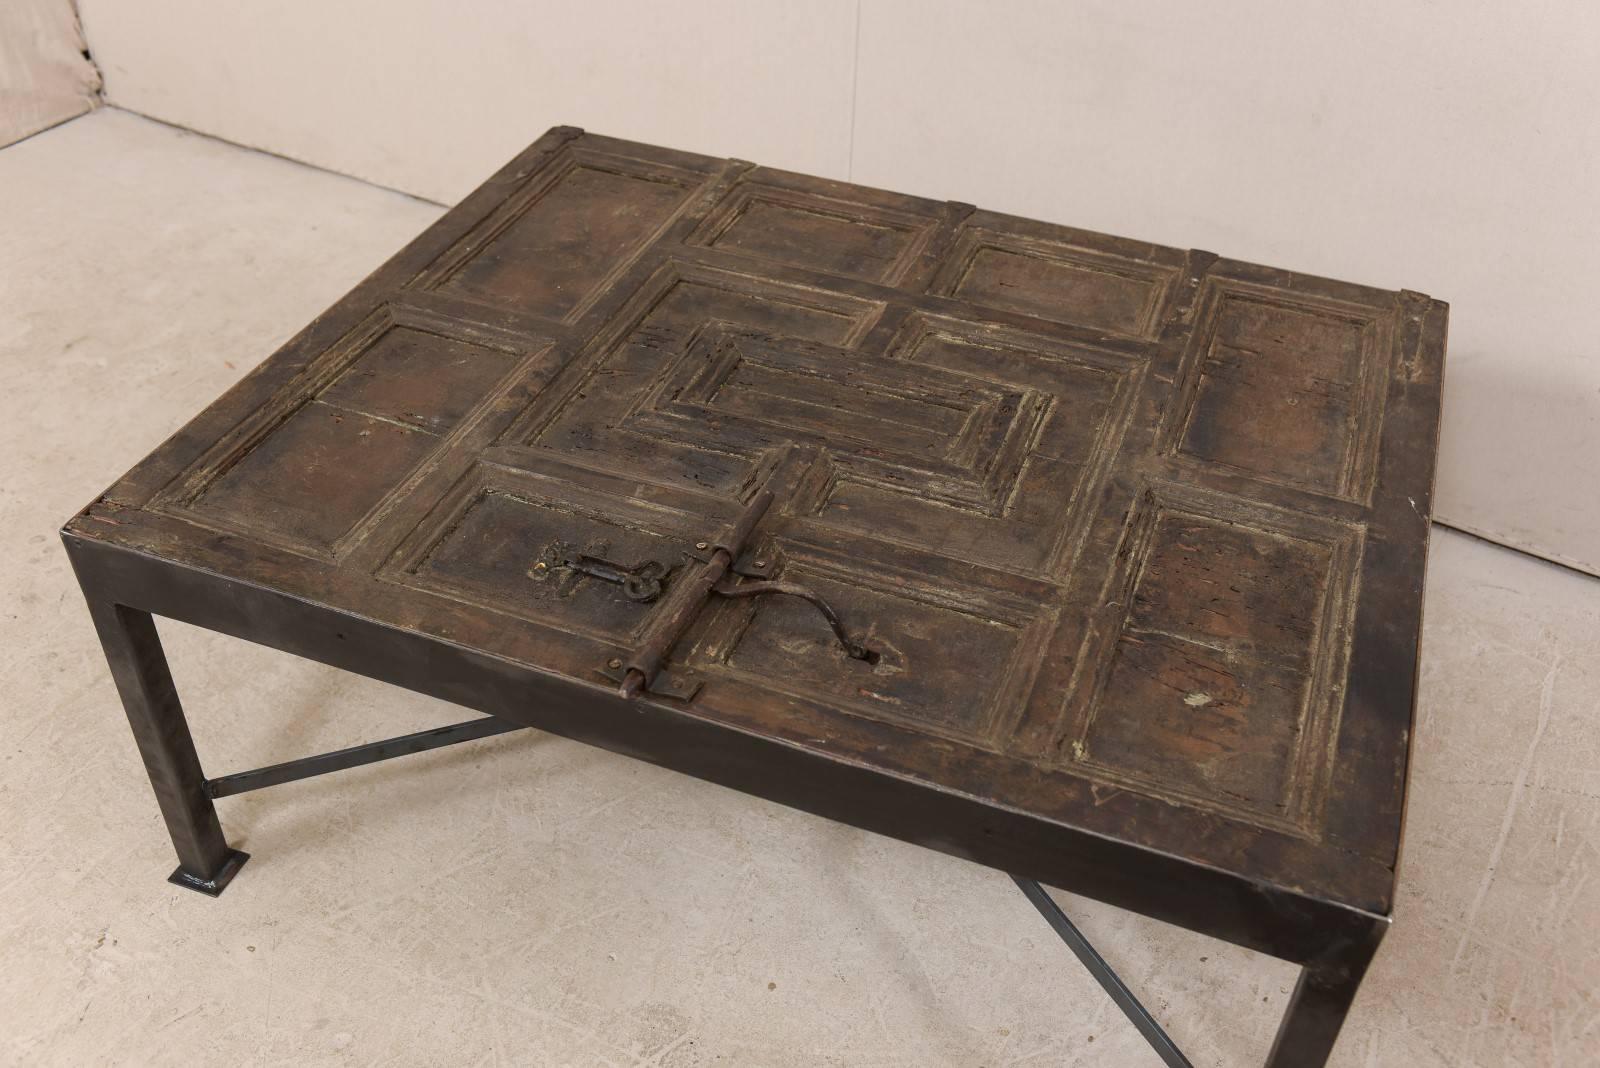 Carved Unique & Custom Designed Coffee Table w/ an 18th Century Spanish Door Top